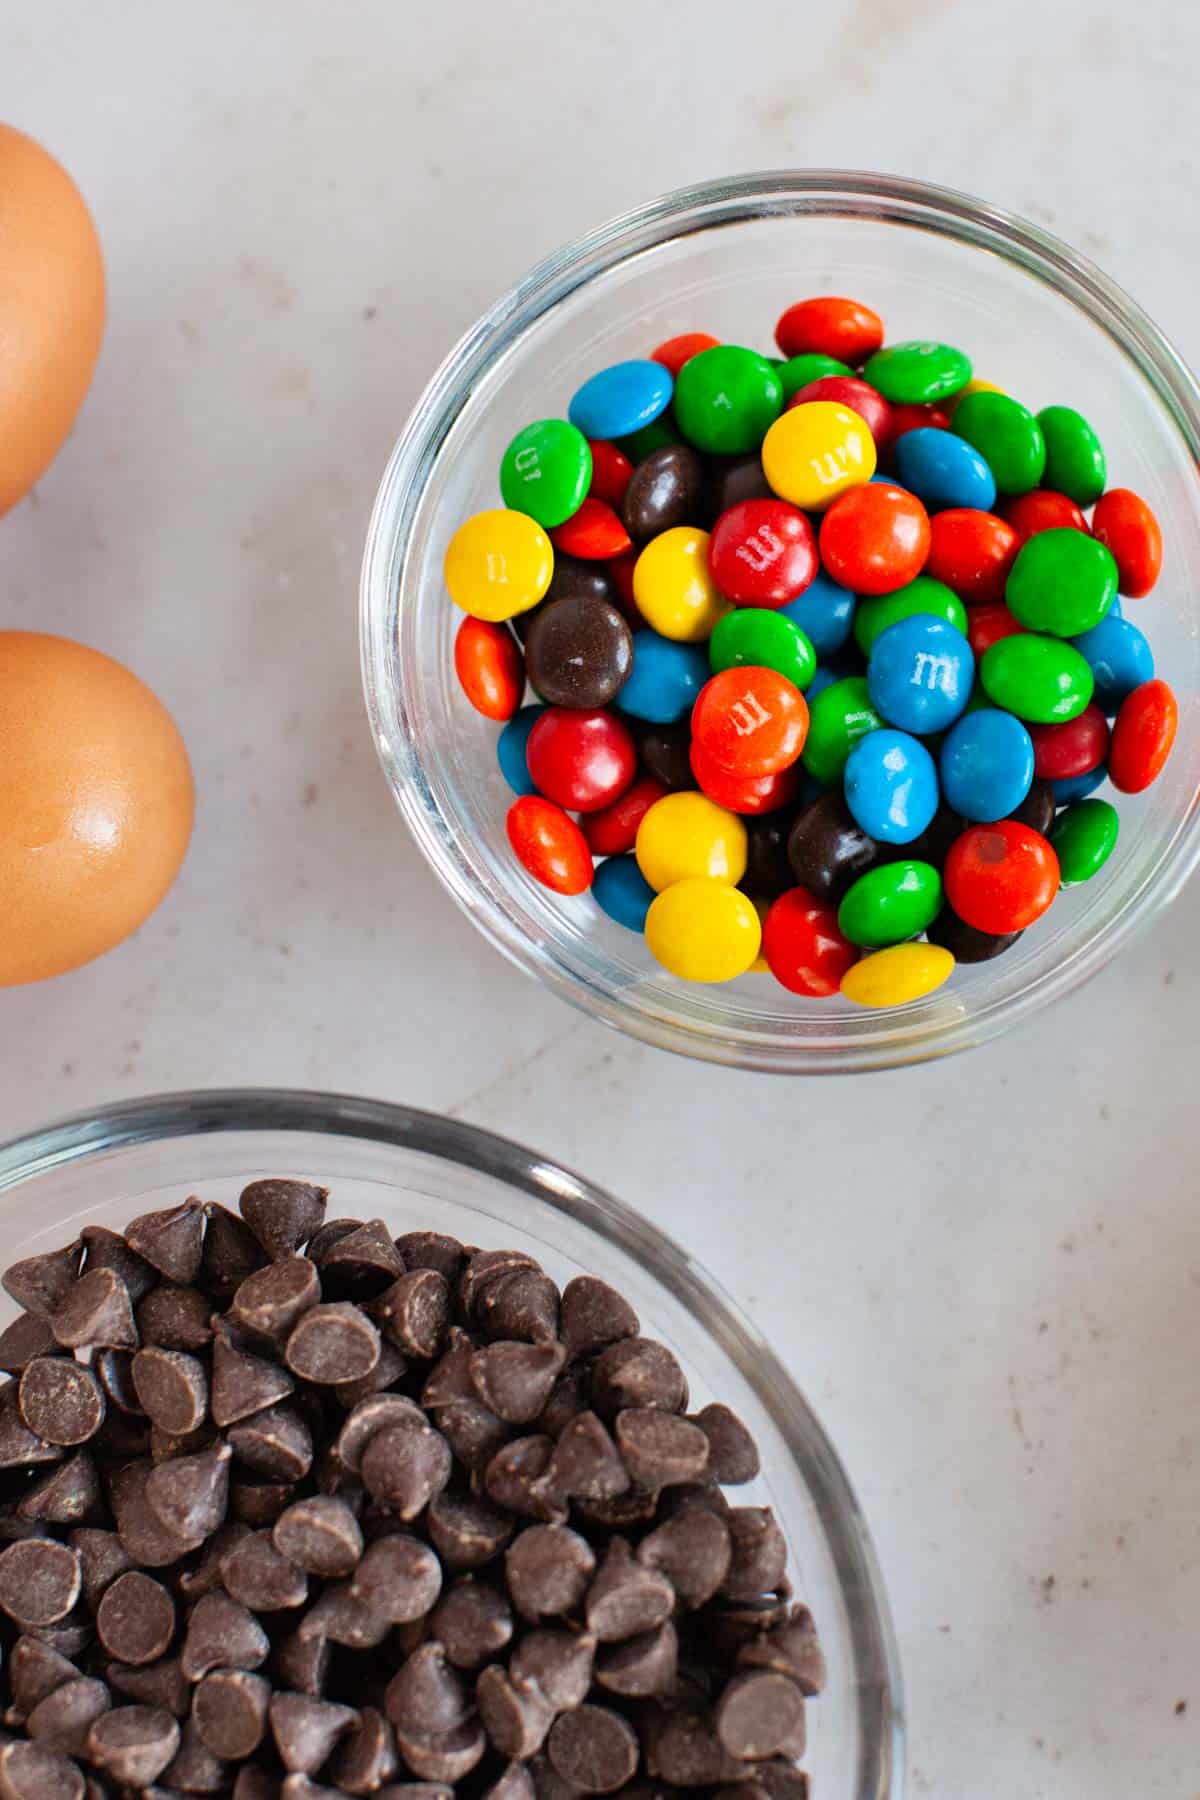 M&M's and chocolate chips in small glass bowls.